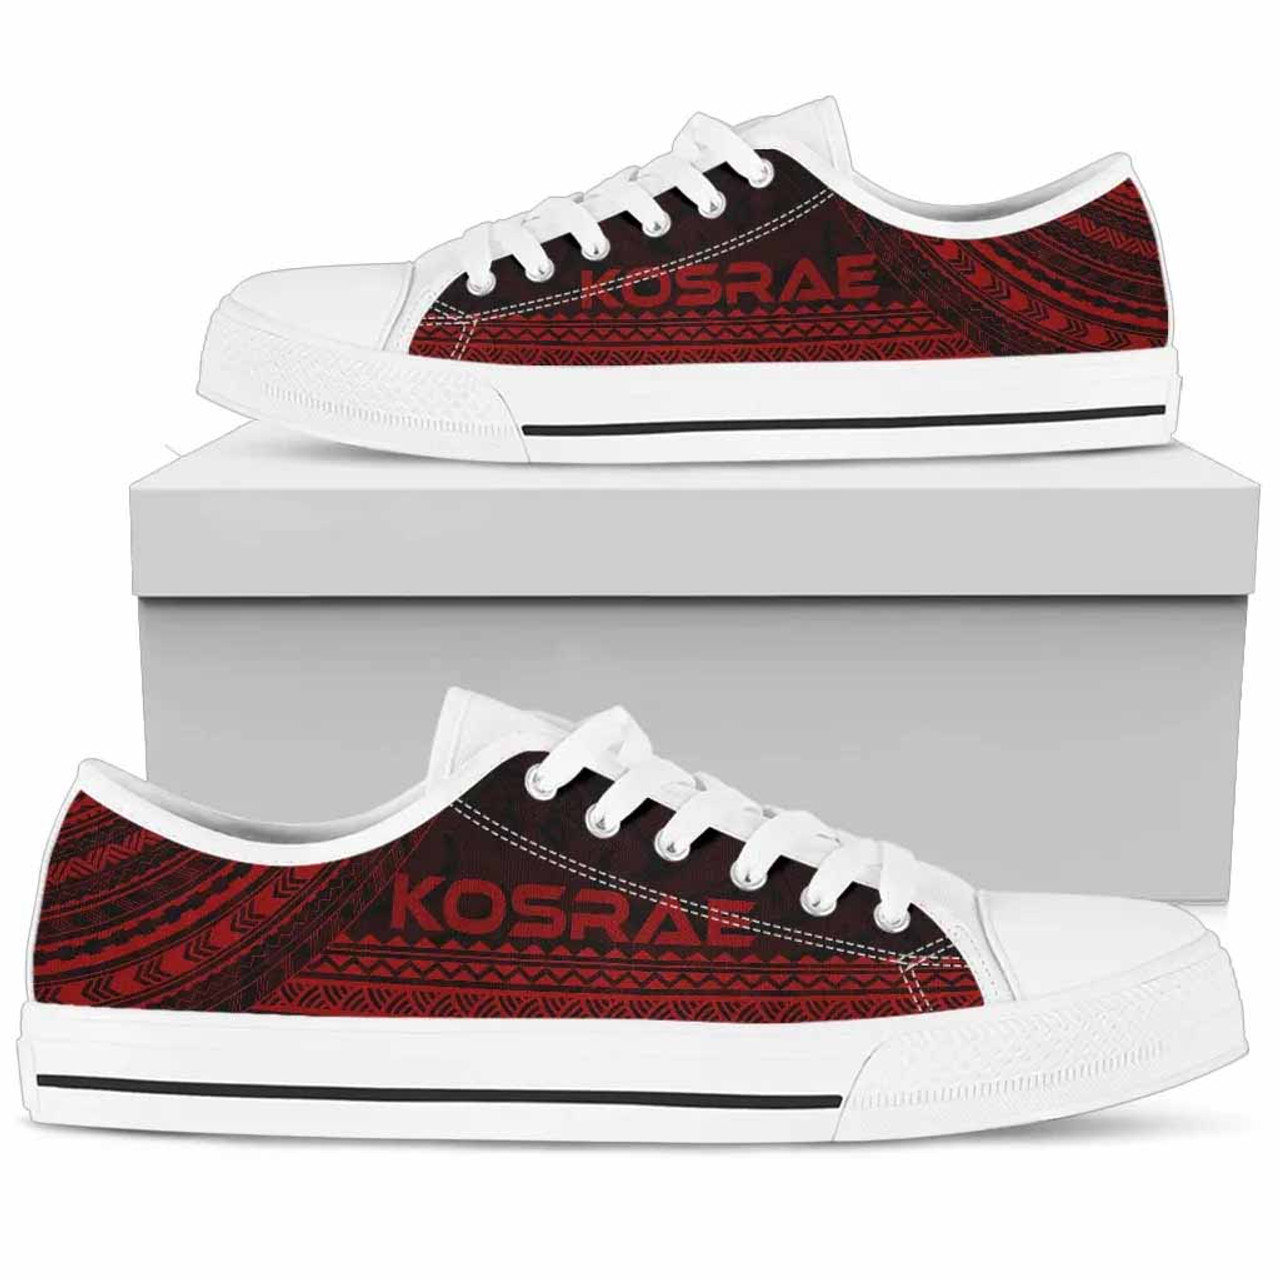 Kosrae Low Top Shoes - Polynesian Red Chief Version 1